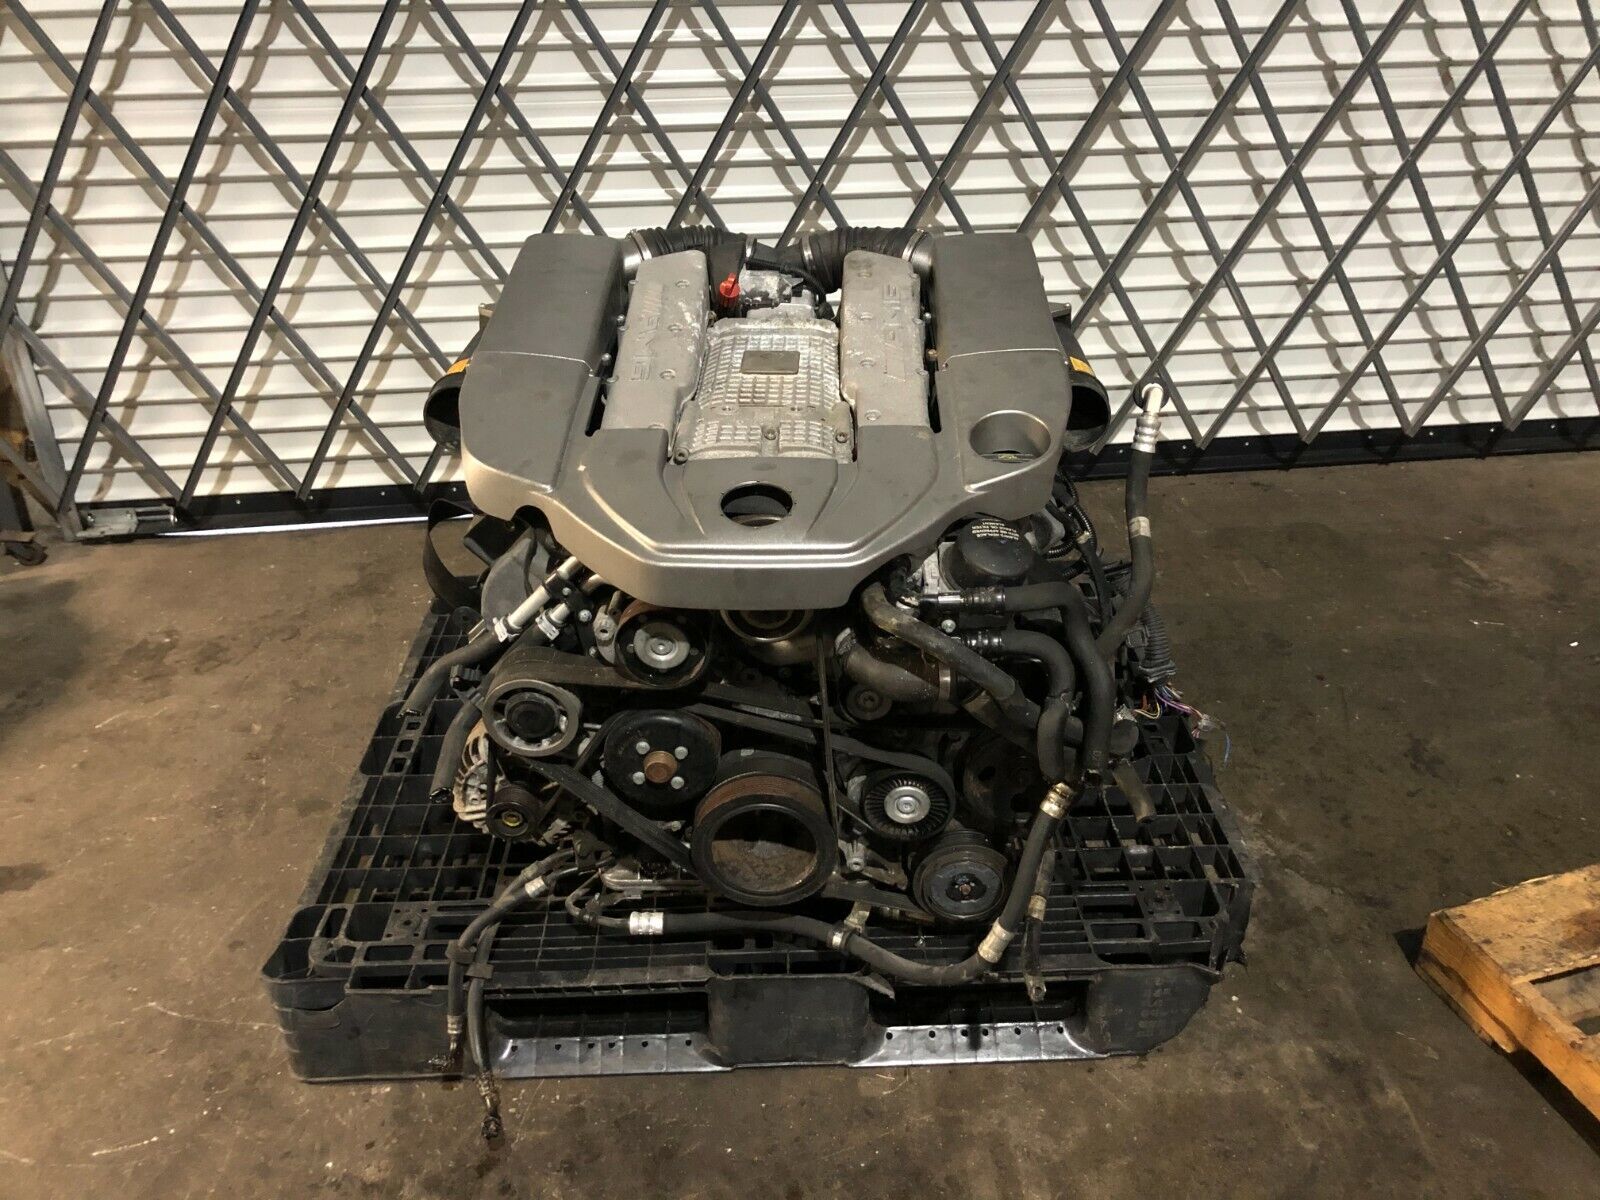 MERCEDES BENZ OEM S55 E55 CL55 CLS55 AMG FRONT ENGINE MOTOR SUPERCHARGED 03-06